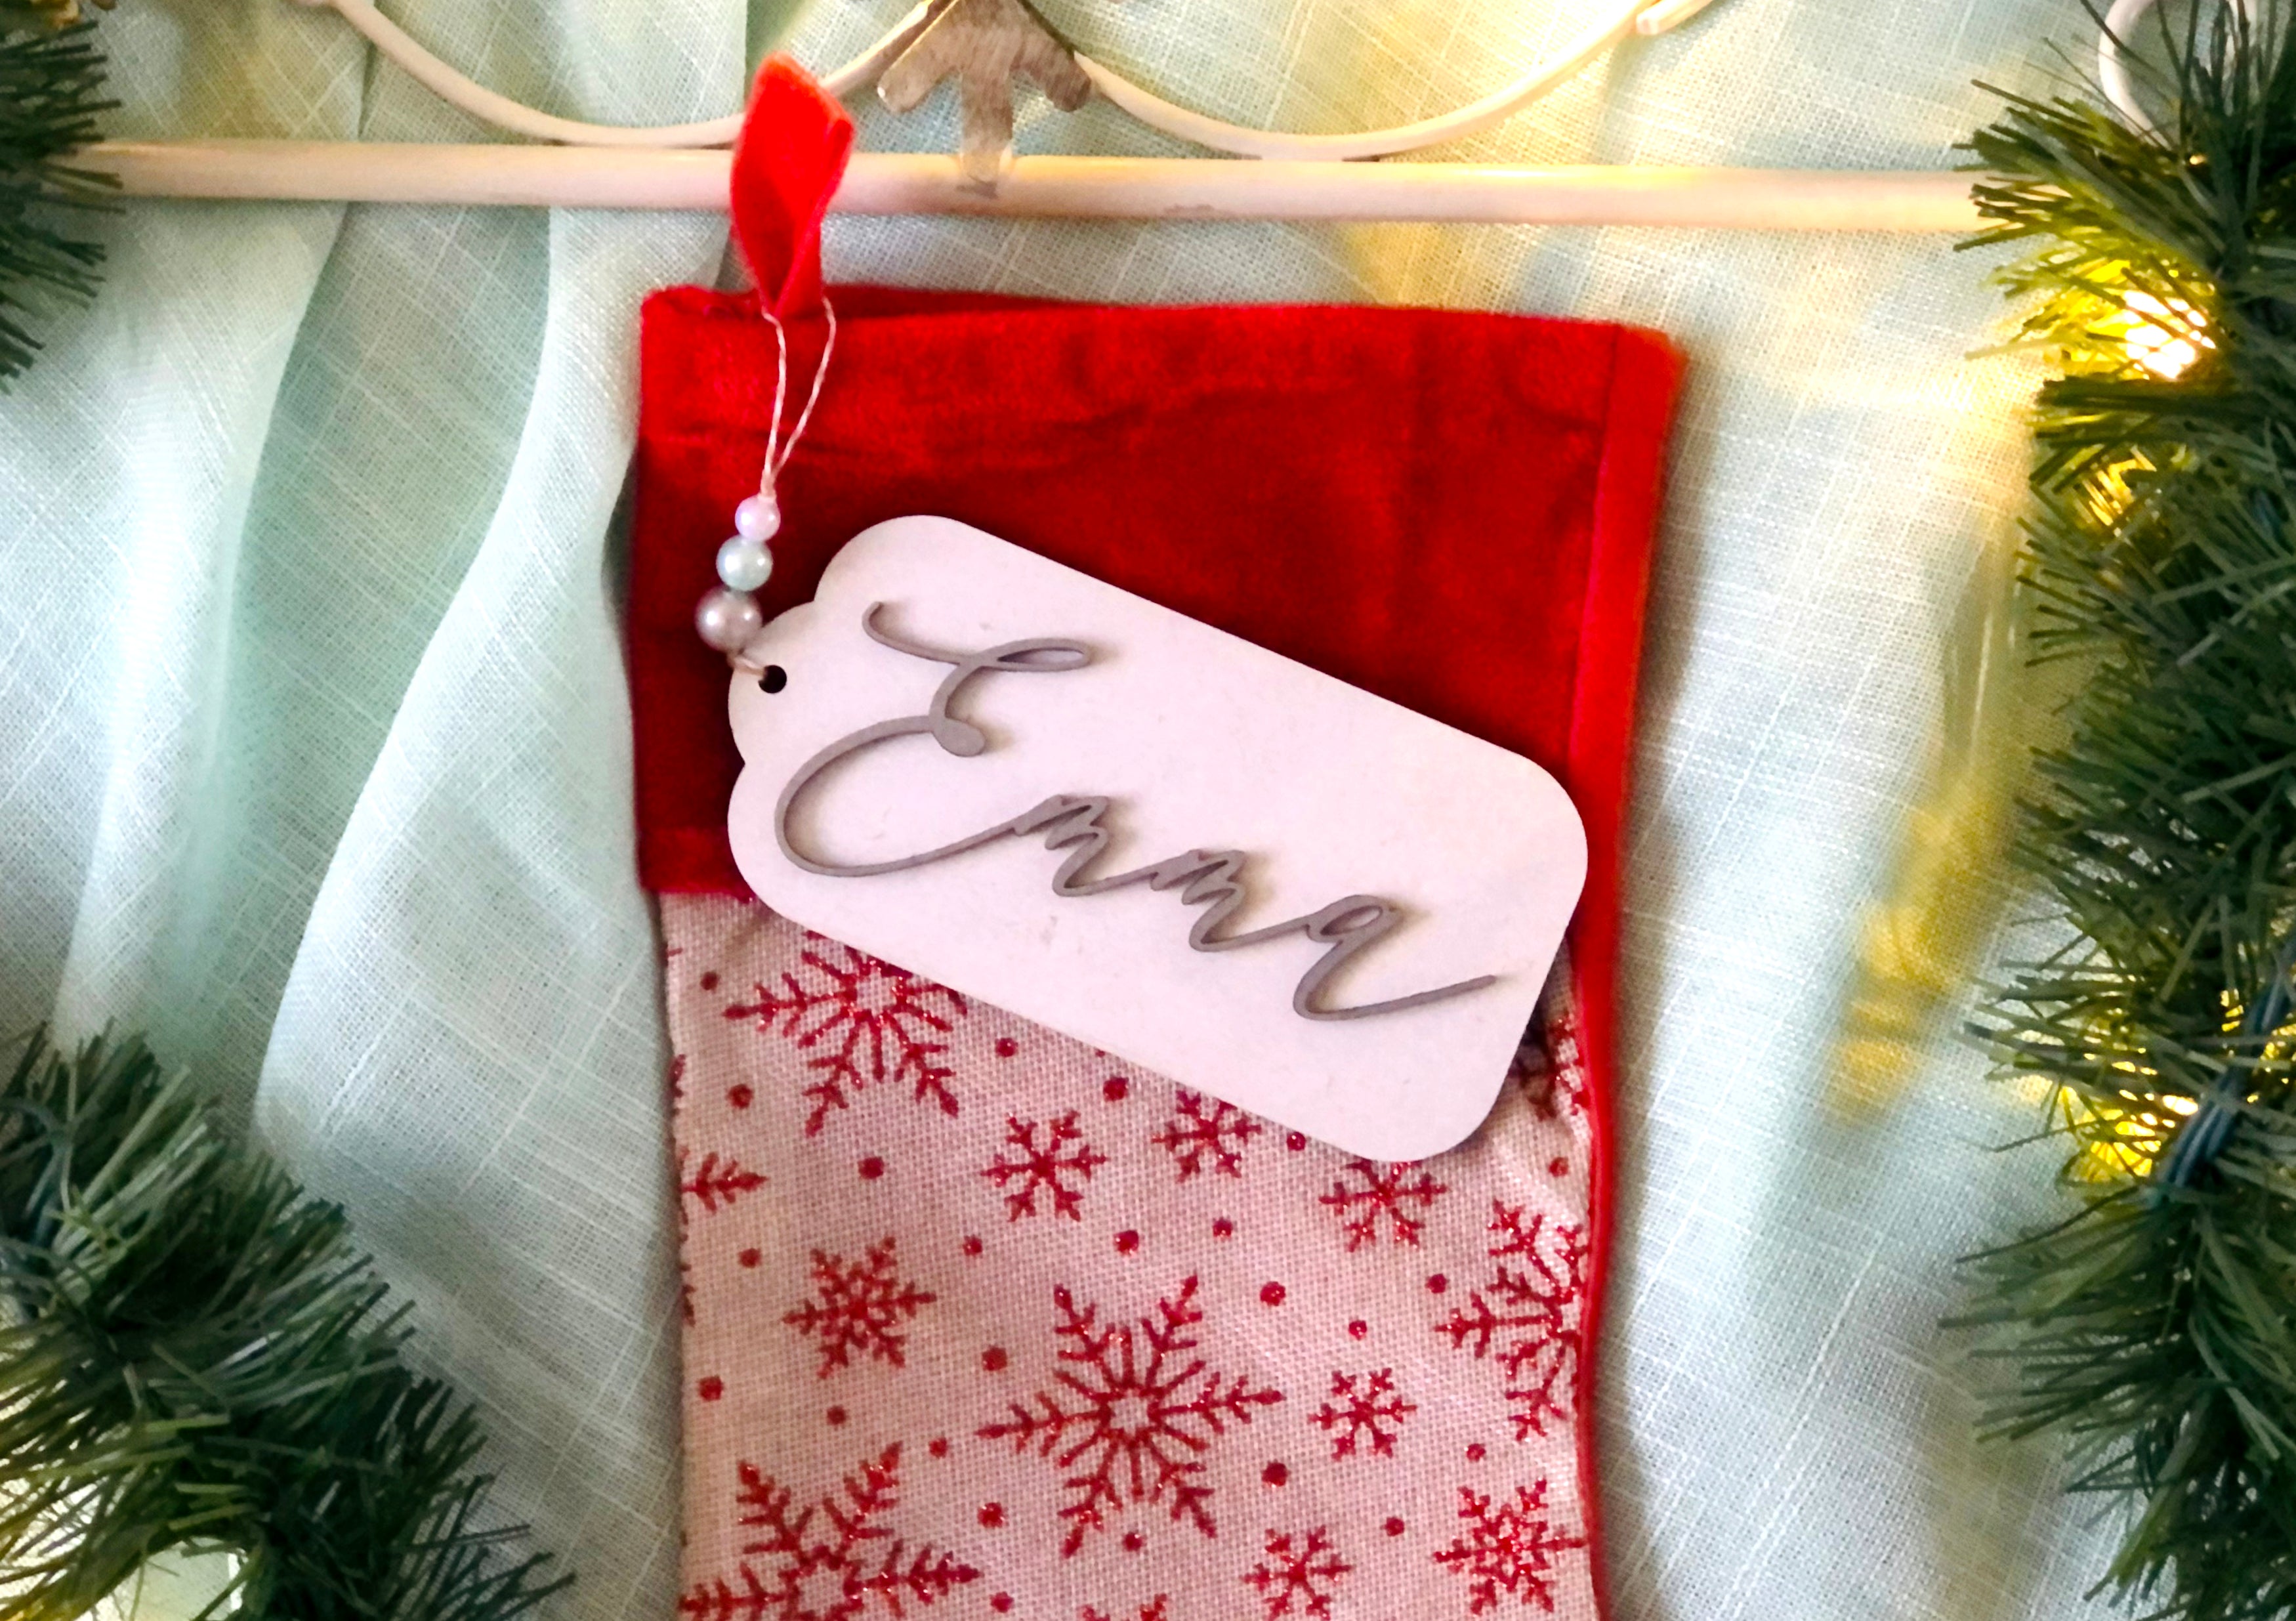 BEST SELLER ENGRAVED Christmas Stocking Name Tag. Pet Wooden 